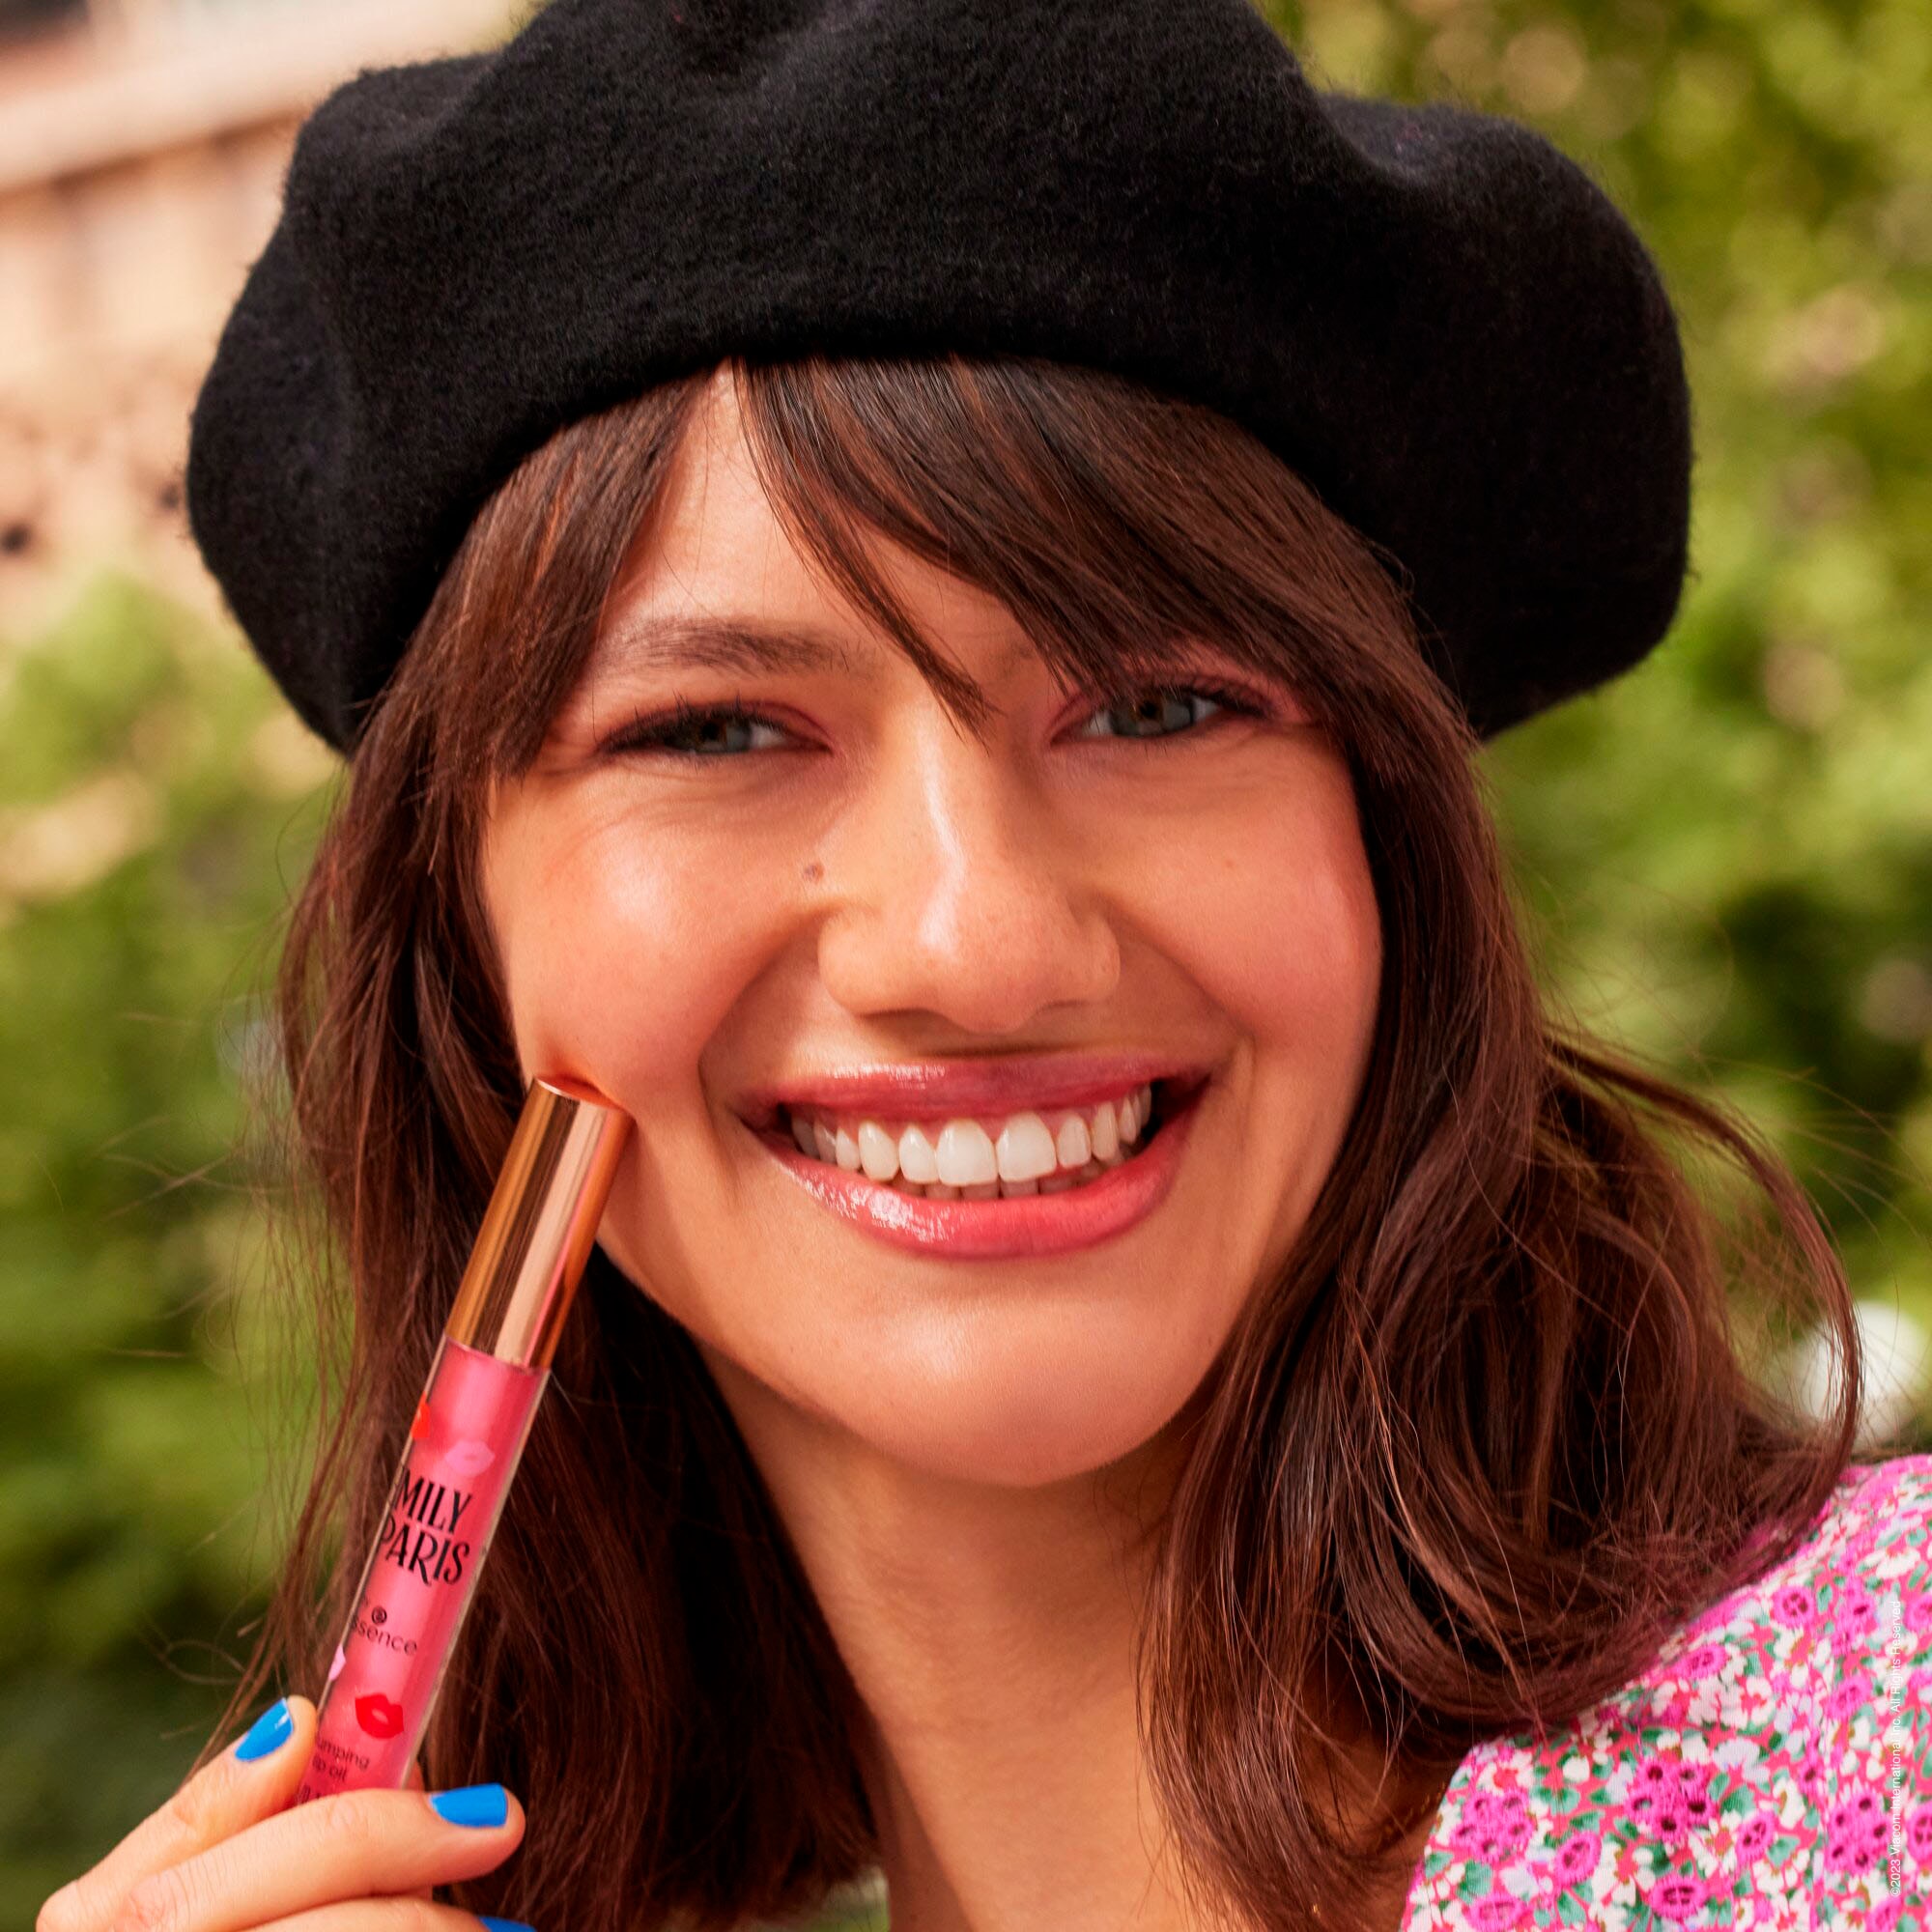 plumping by essence IN »EMILY PARIS lip online bei Essence UNIVERSAL oil« Lipgloss